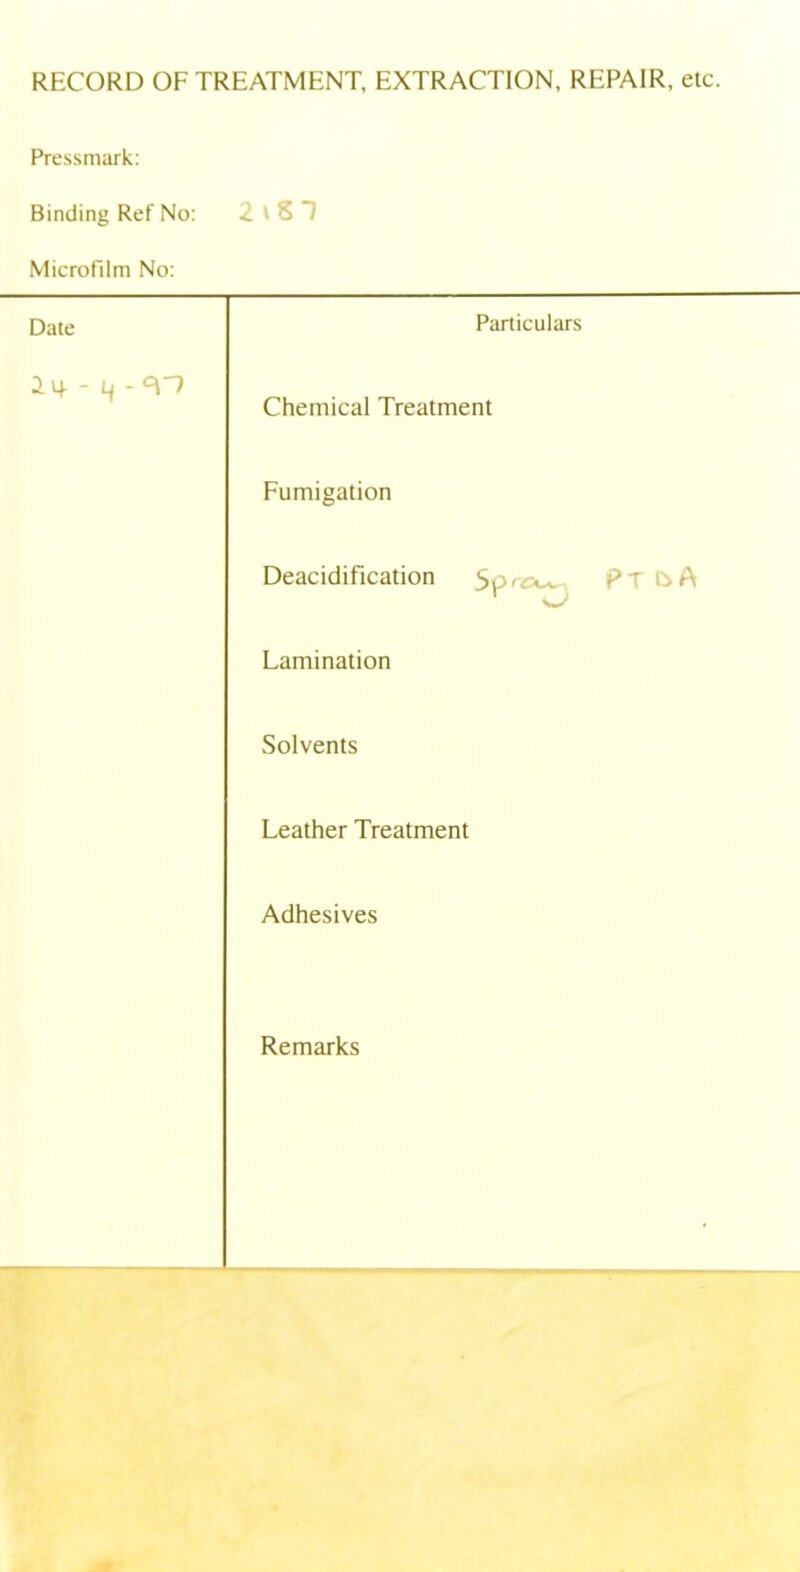 RECORD OF TREATMENT, EXTRACTION, REPAIR, etc. Pressmark Binding Ref No: 2tST Microfilm No: Date Particulars 2if - Li -cpr Chemical Treatment Fumigation Deacidification 5orc^ P T C>A r ^ Lamination Solvents Leather Treatment Adhesives Remarks